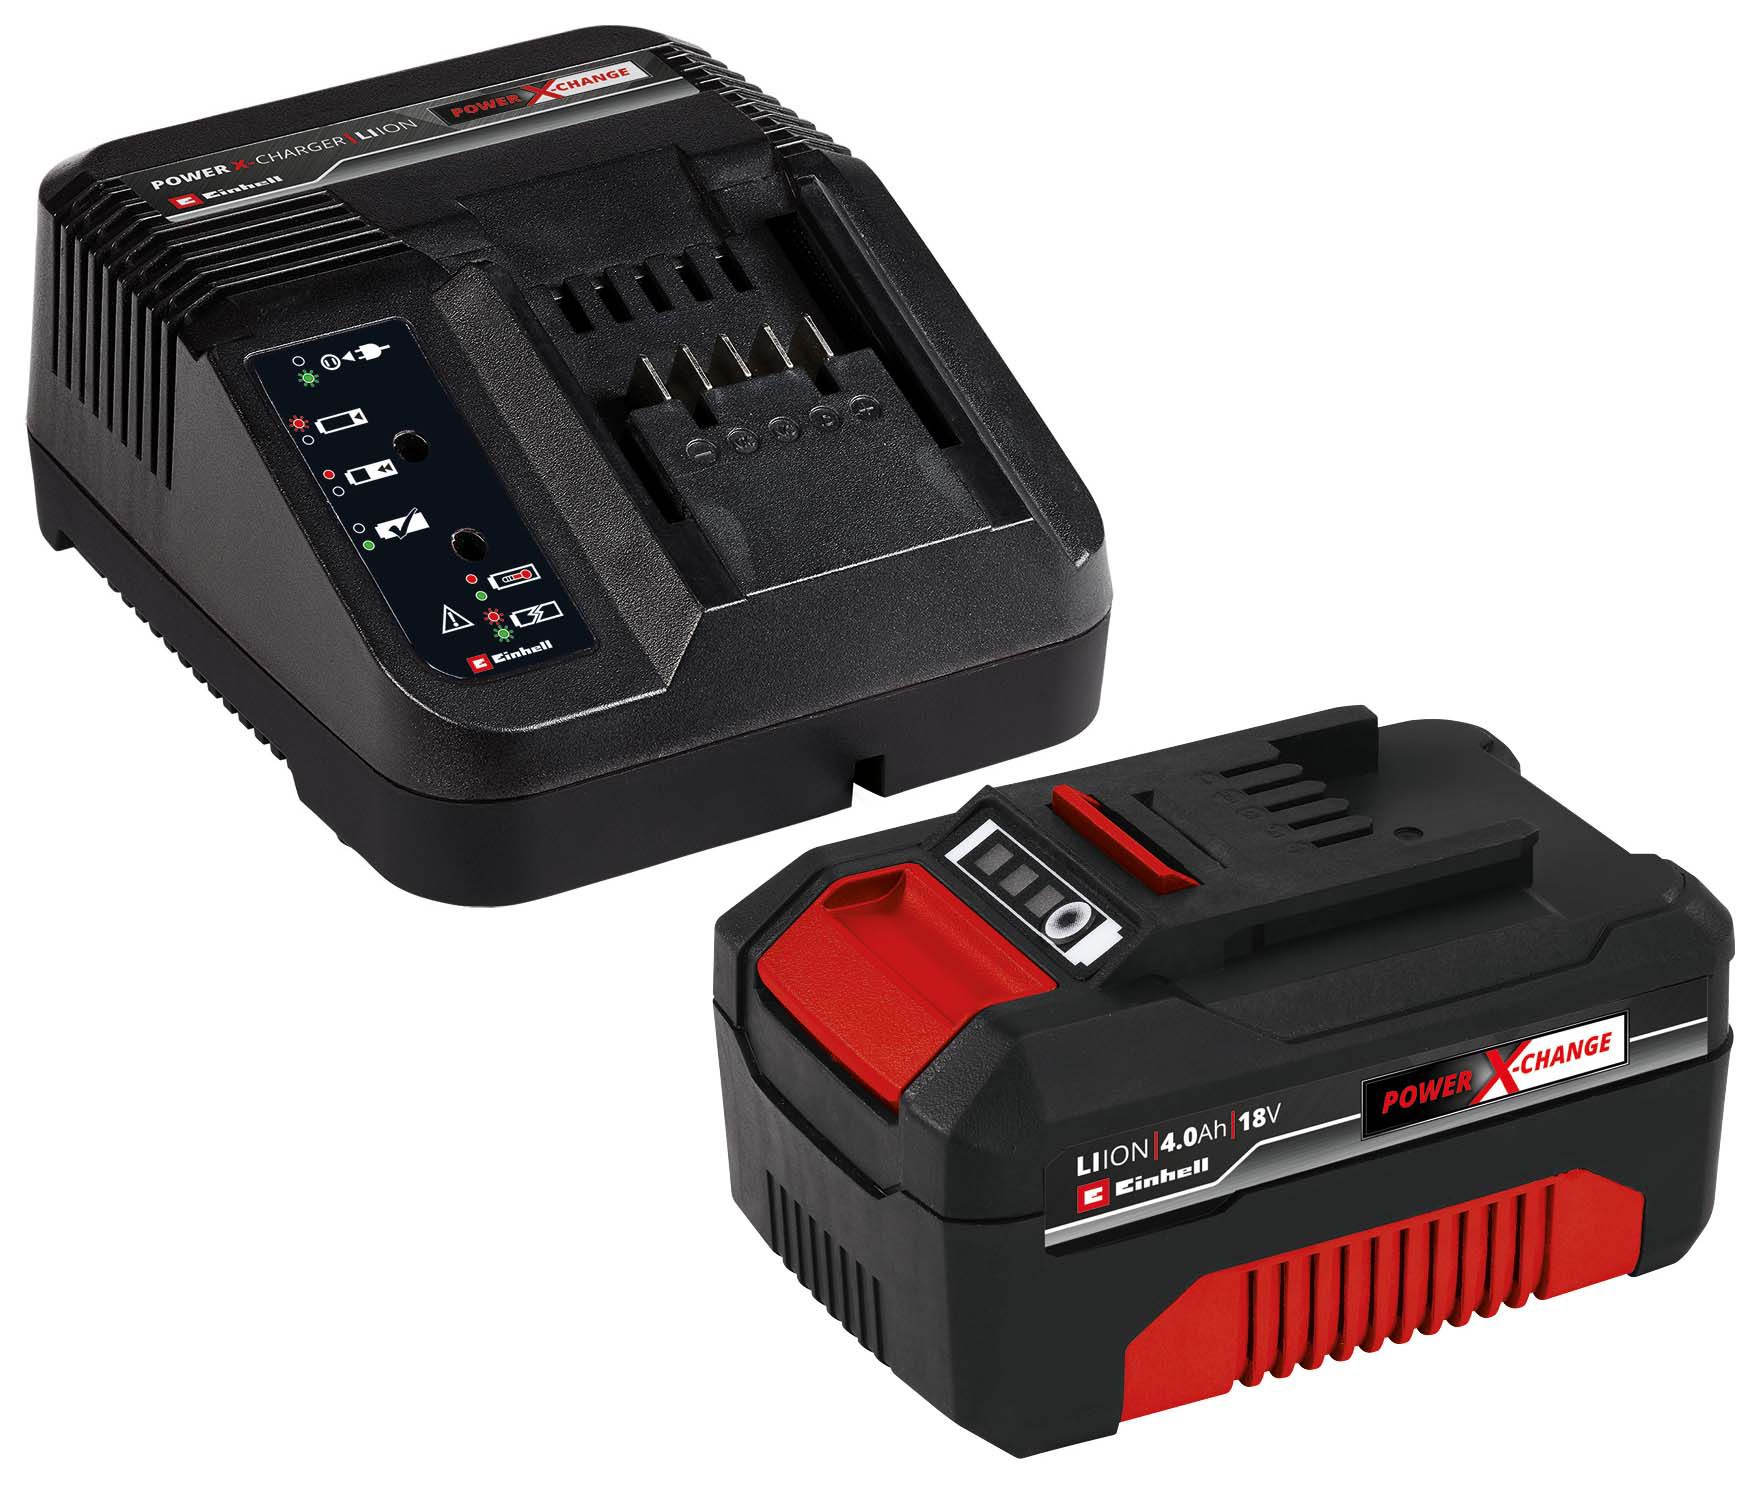 Image of Einhell Power X-Change 18V 4.0Ah Battery and Fast Charger Starter Kit